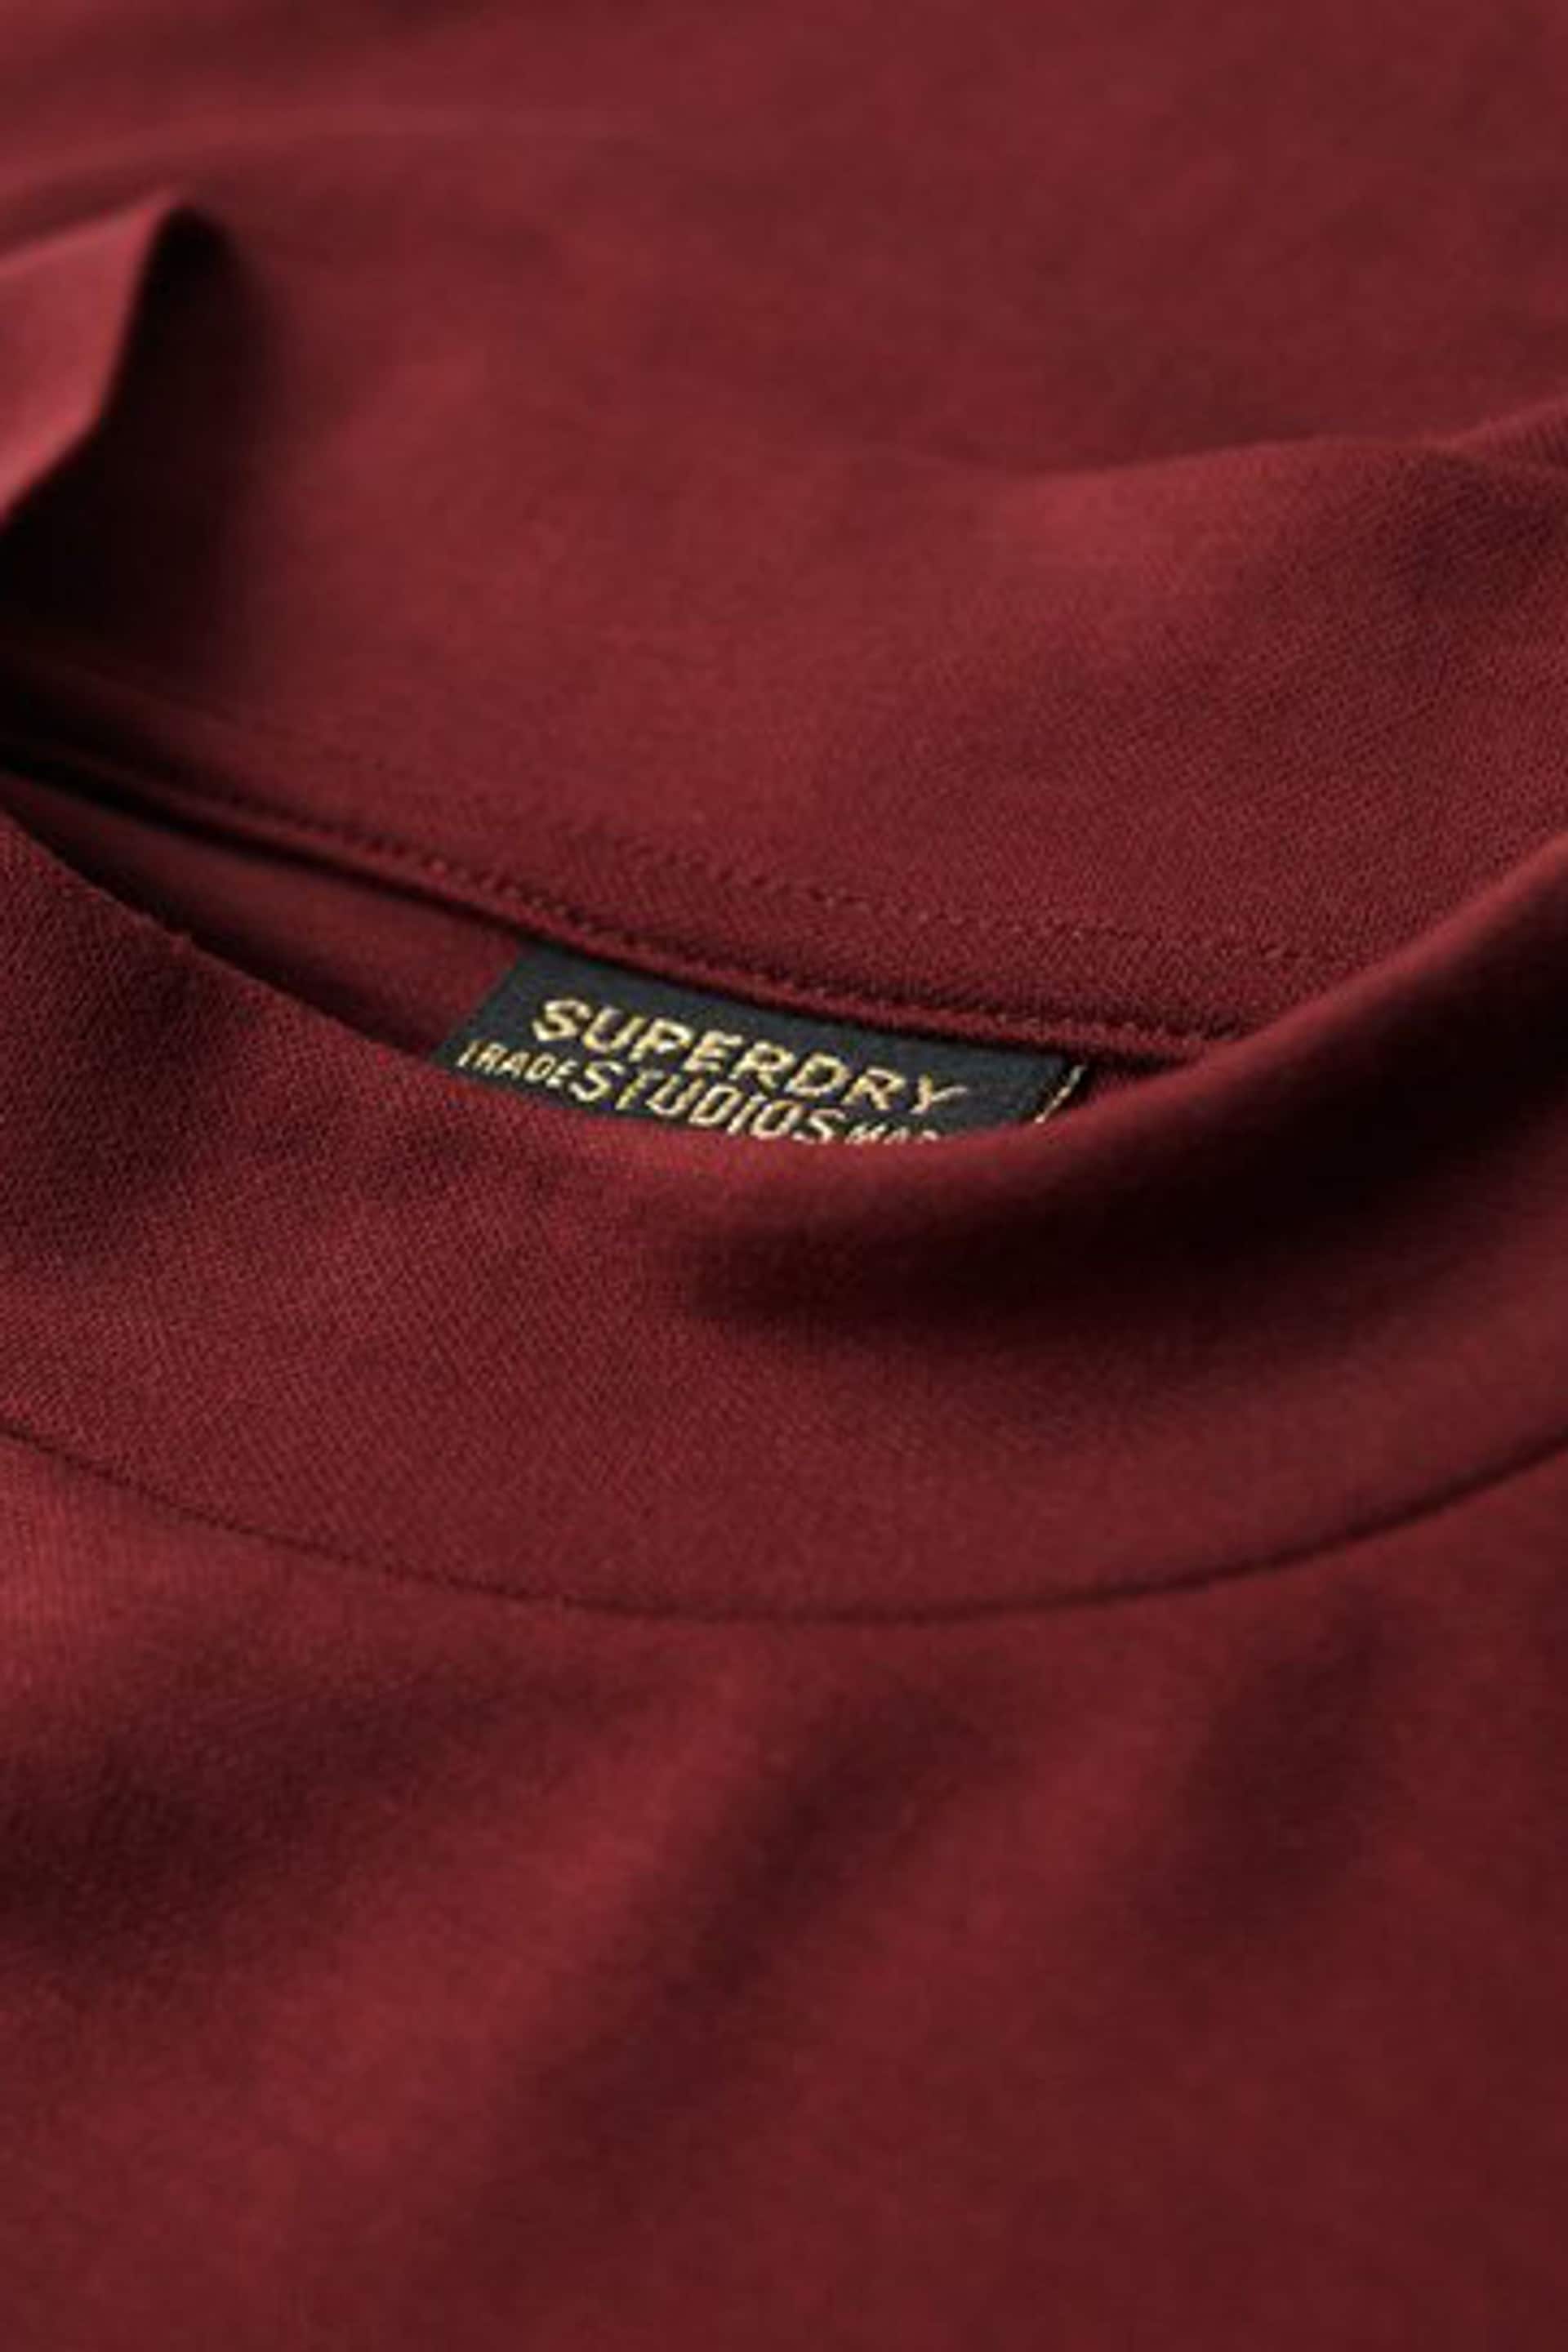 Superdry Red Jersey Open Back Top - Image 7 of 7